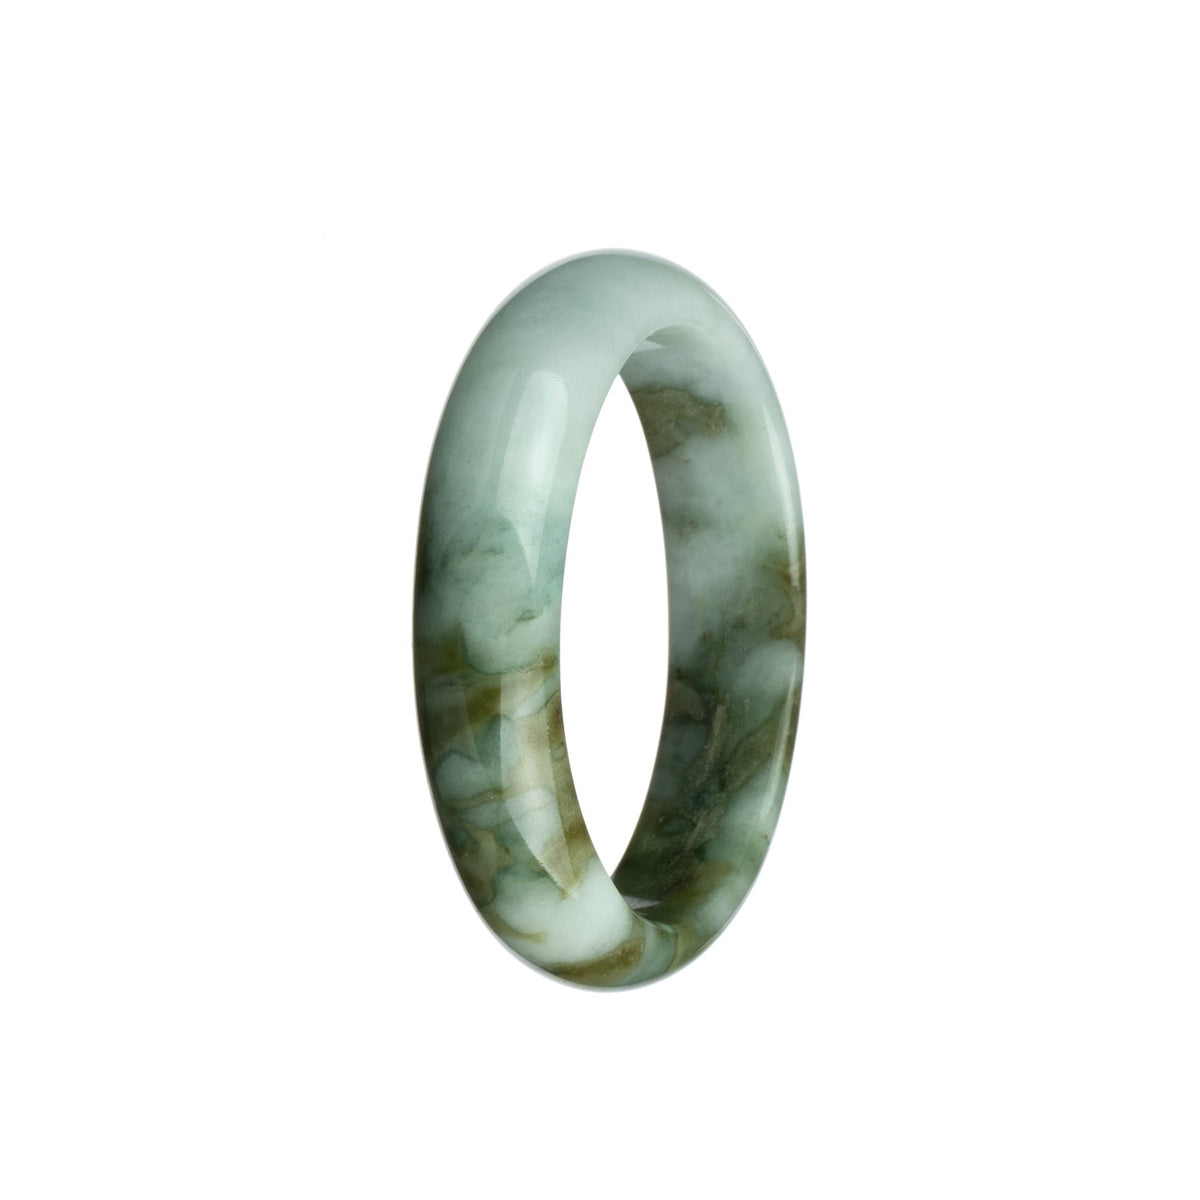 A stunning olive green and white jadeite jade bangle bracelet in a half moon shape, untreated and authentic.